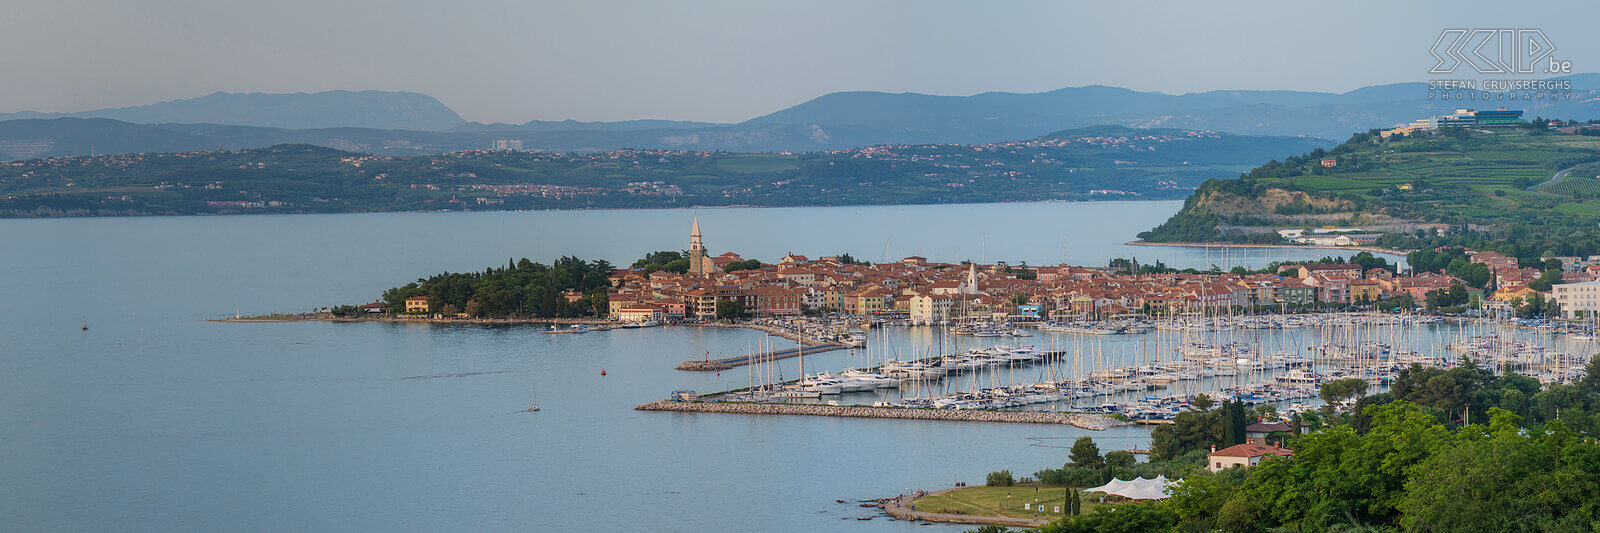 Izola View of Izola, another Slovenian town on the Adriatic coast Stefan Cruysberghs